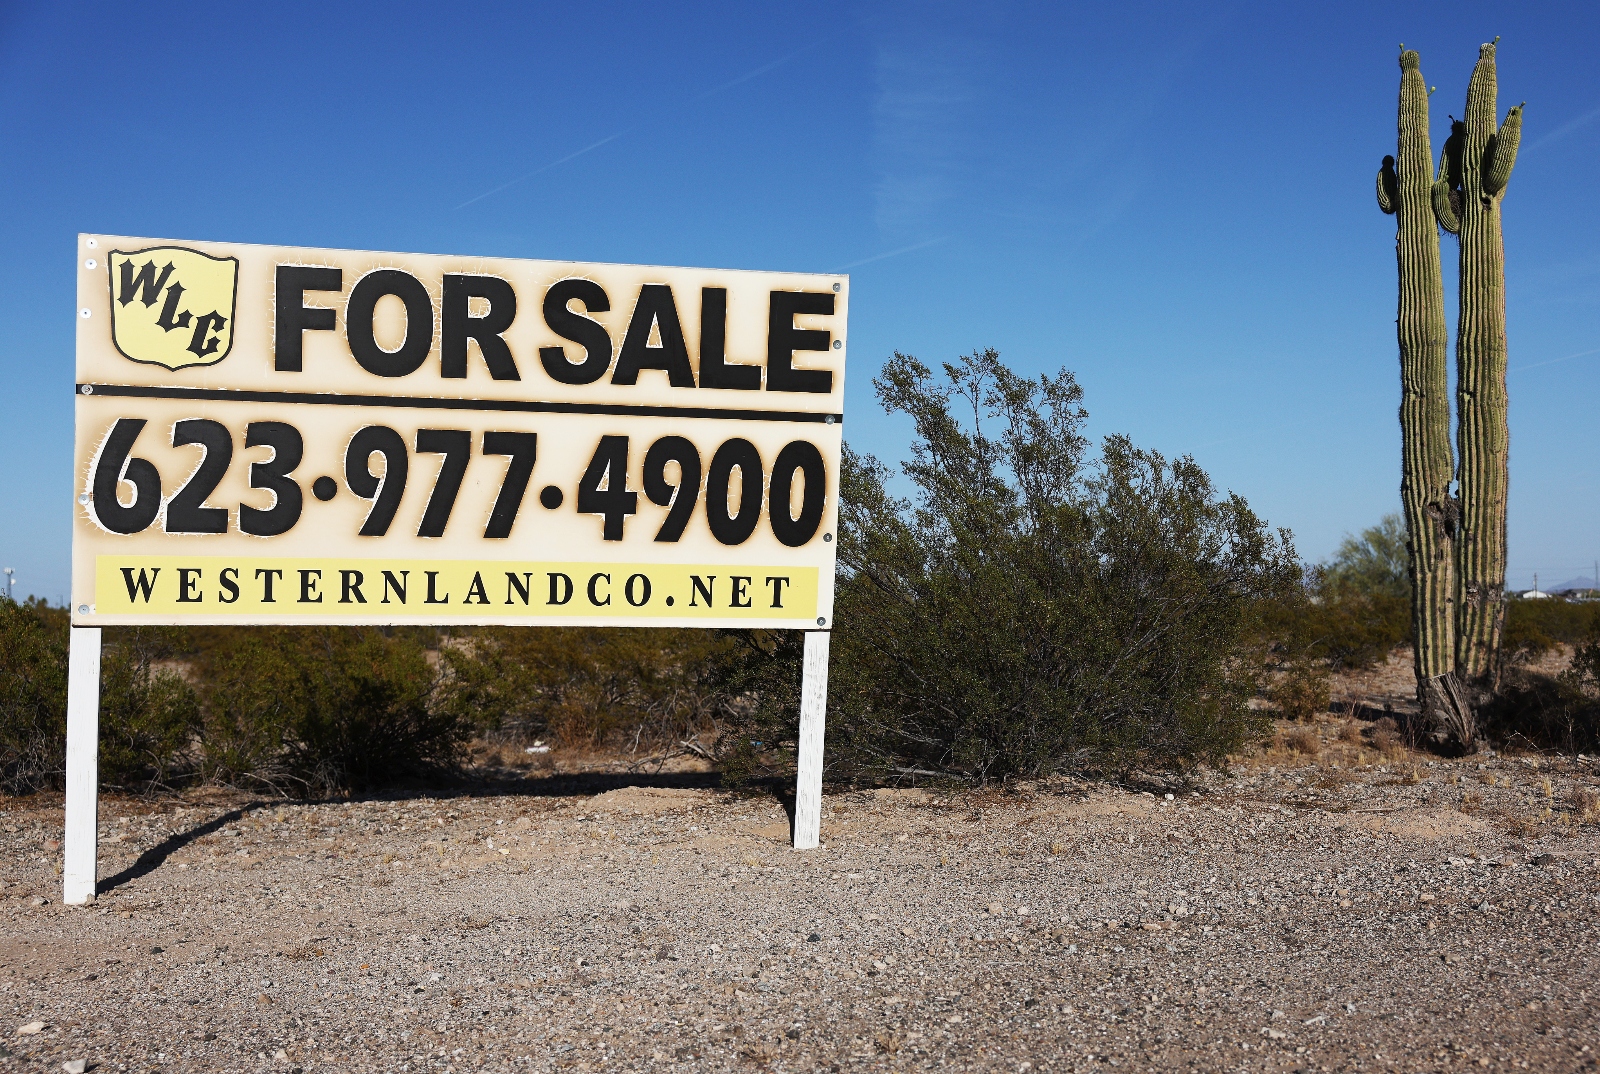 A land for sale sign next to two saguaro cacti.